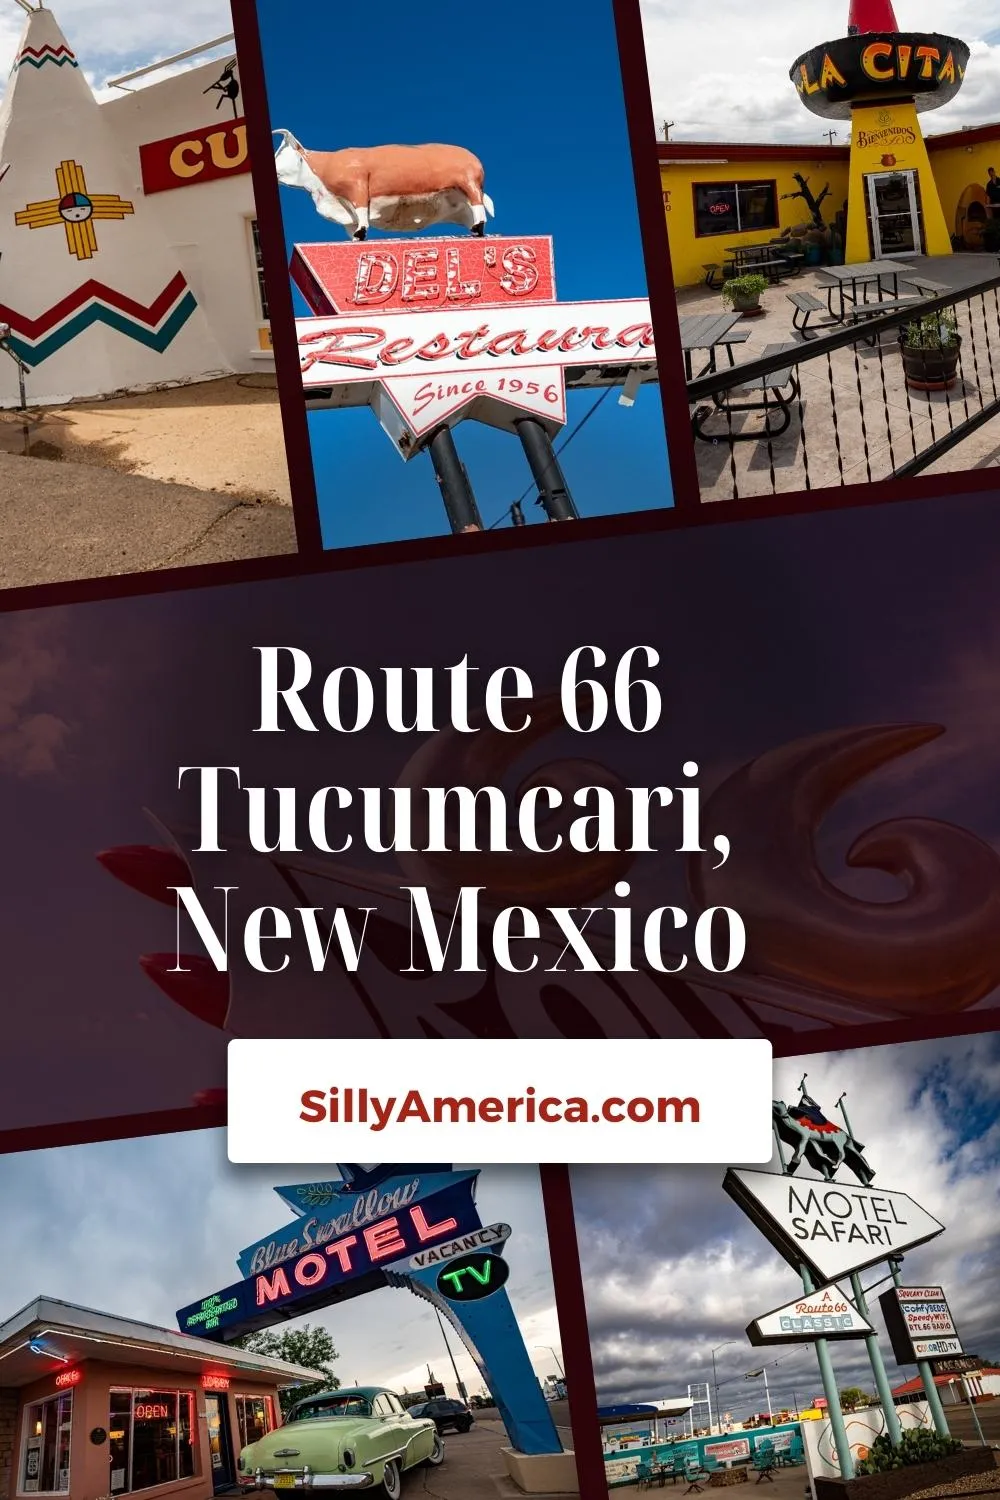 Tucumcari, New Mexico is a must-stop town on your Route 66 road trip. Known for its neon lights, plethora of classic motel rooms, and vintage Americana charm, the Route 66 Tucumcari, New Mexico attractions can't be missed! Planning a Route 66 road trip through New Mexico? These are some of the best Route 66 Tucumcari, New Mexico attractions, motels, and restaurants to add to your travel itinerary! #Tucumcari #TucumcariNewMexico #TucumcariRoute66 #NewMexico #NewMexicoRoute66 #Route66 #RoadTrip